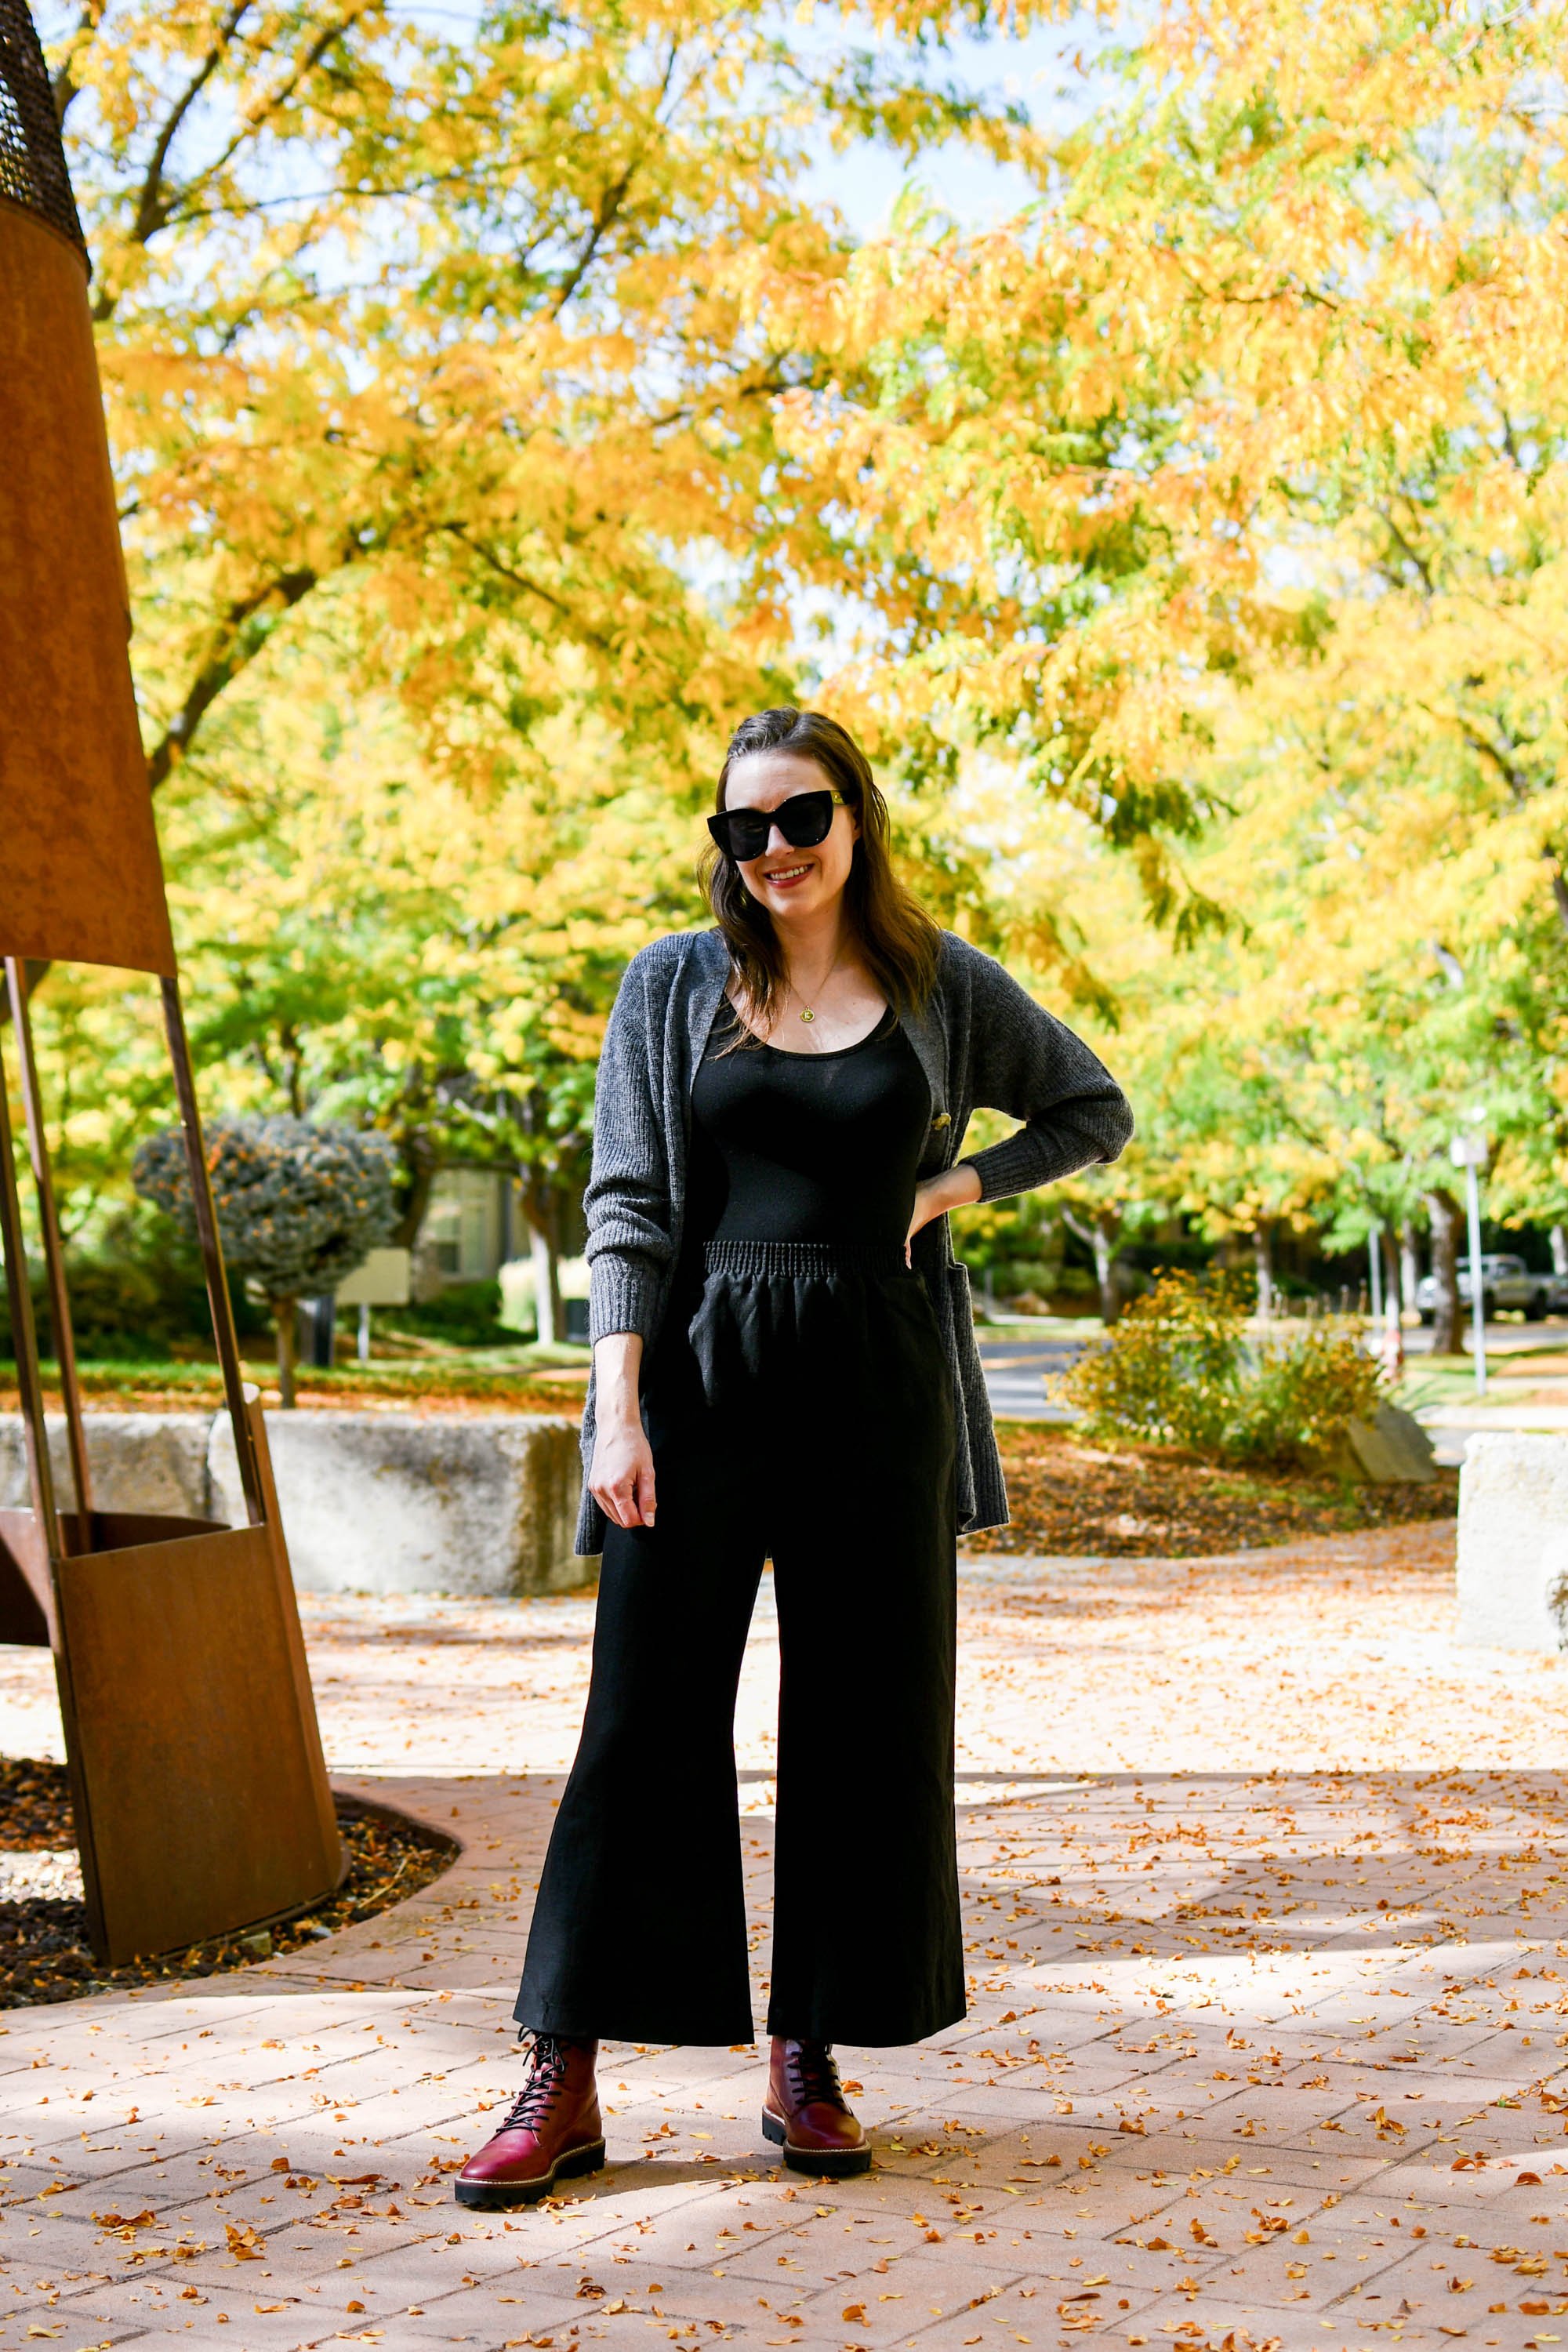 Millennial Style: Lugsole with Wide Leg Pants